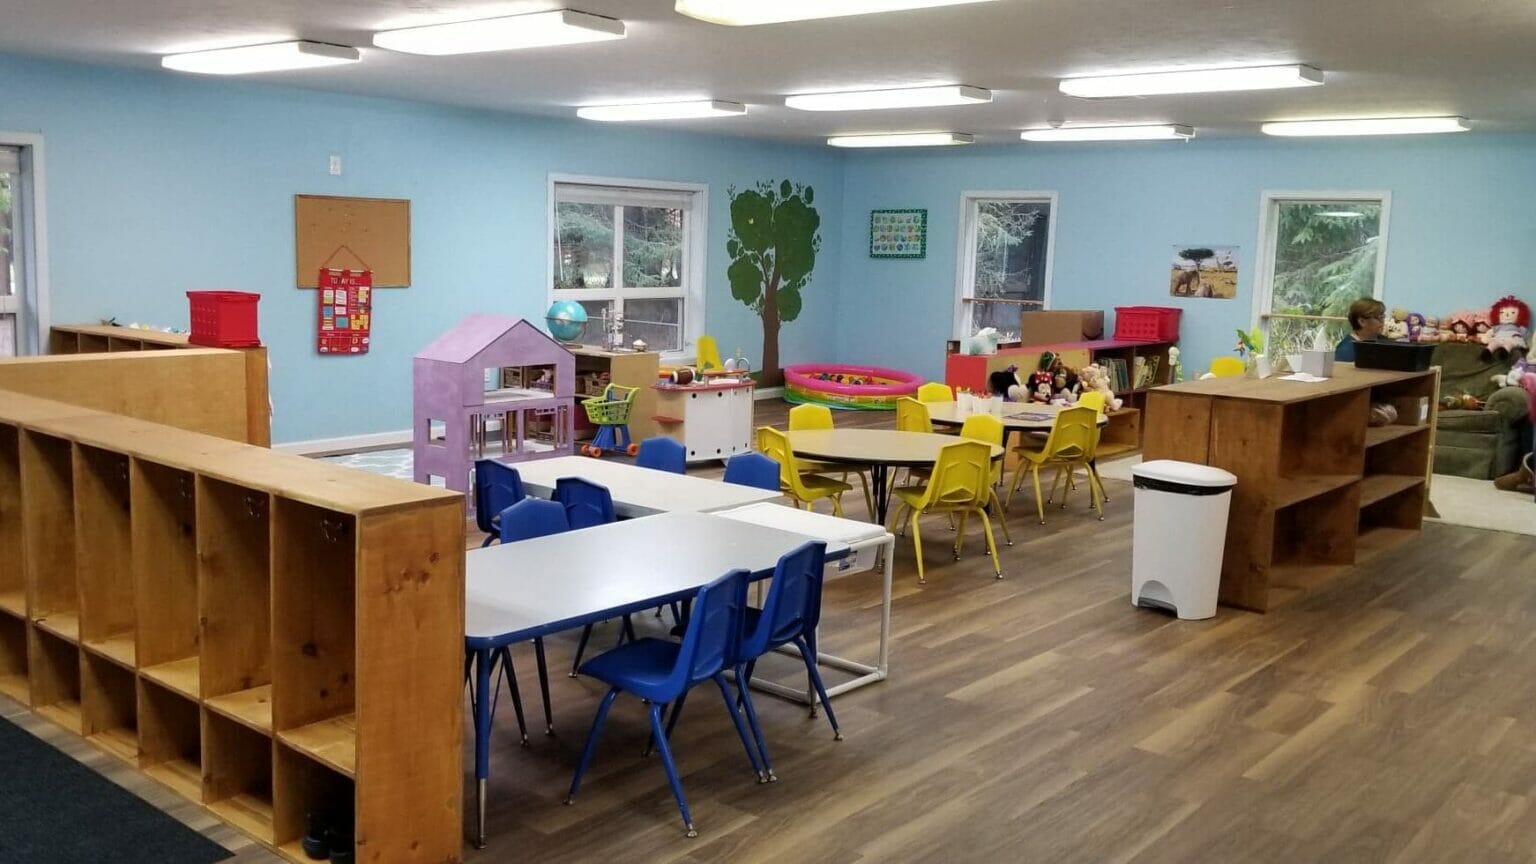 Providers and lawmakers seek a way out of Alaska’s childcare shortage